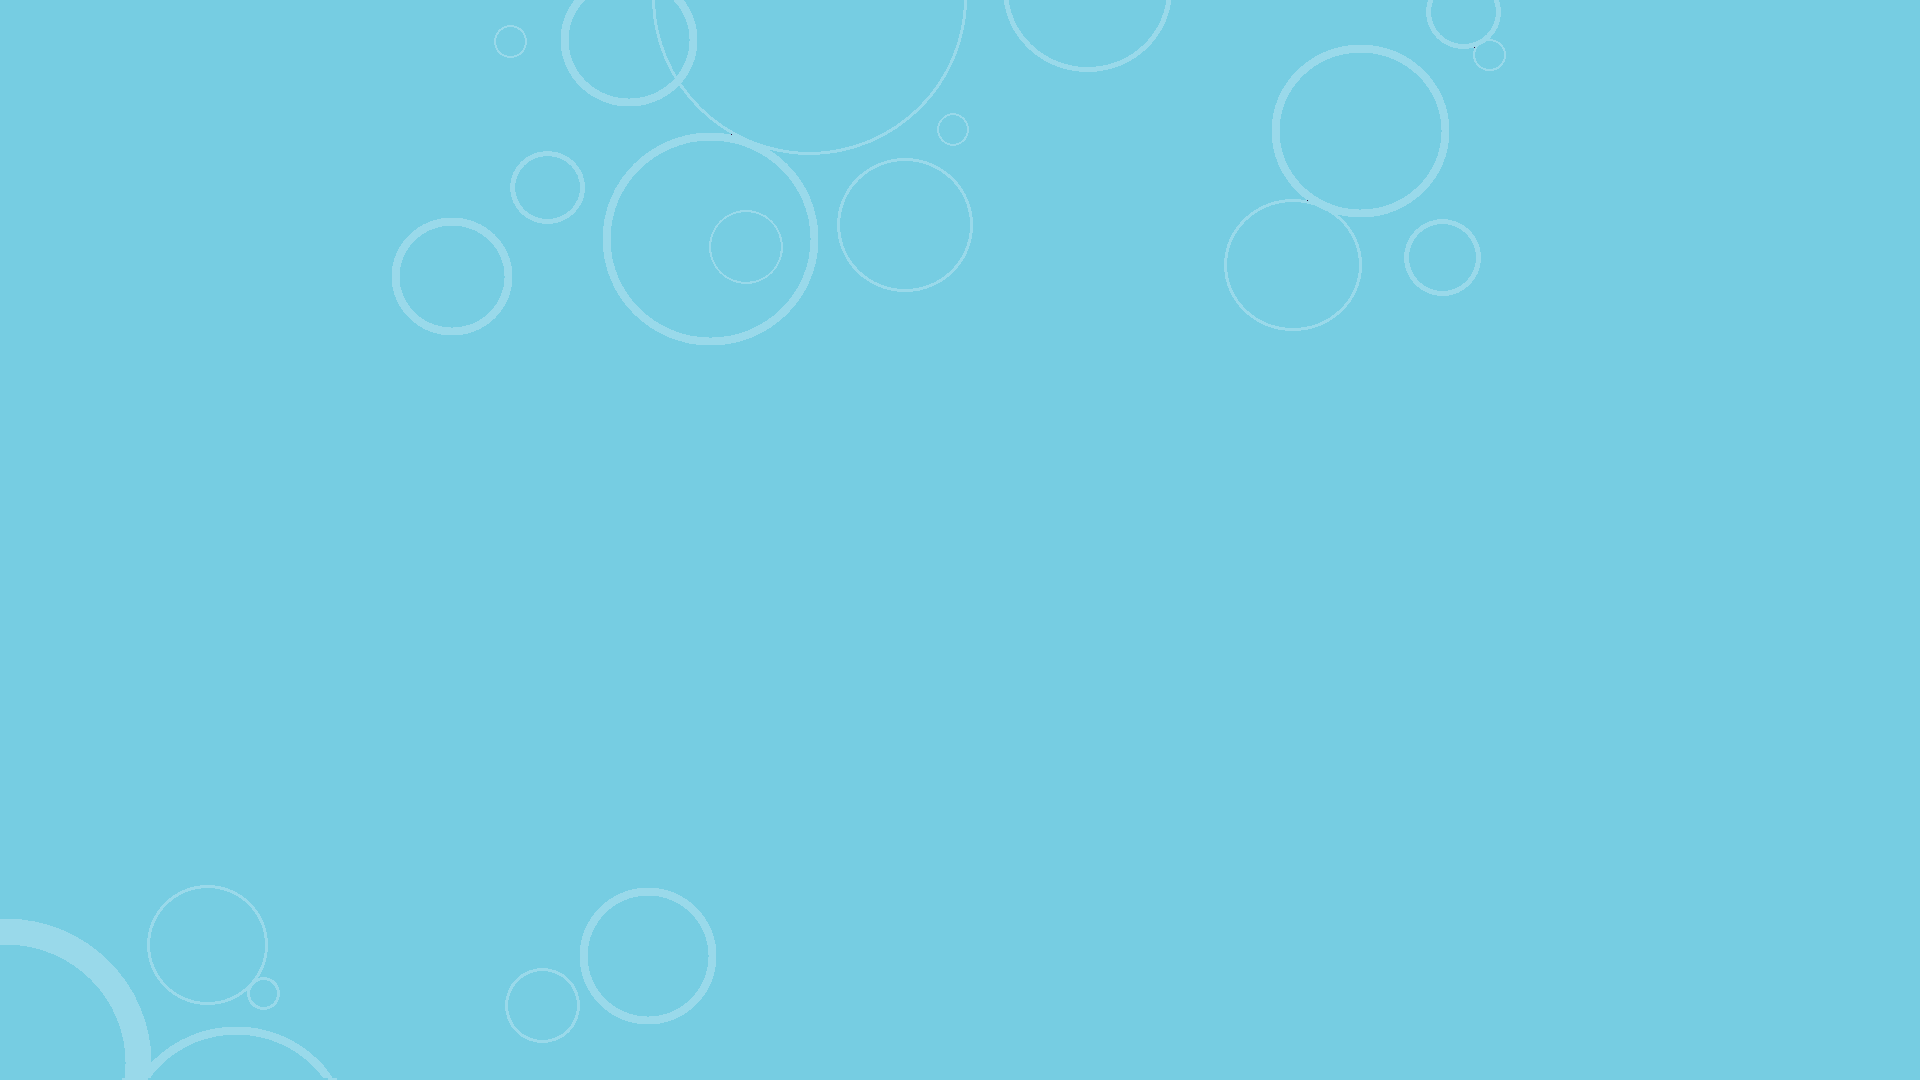 Light Blue Windows 8 Bubbles Background by gifteddeviant on